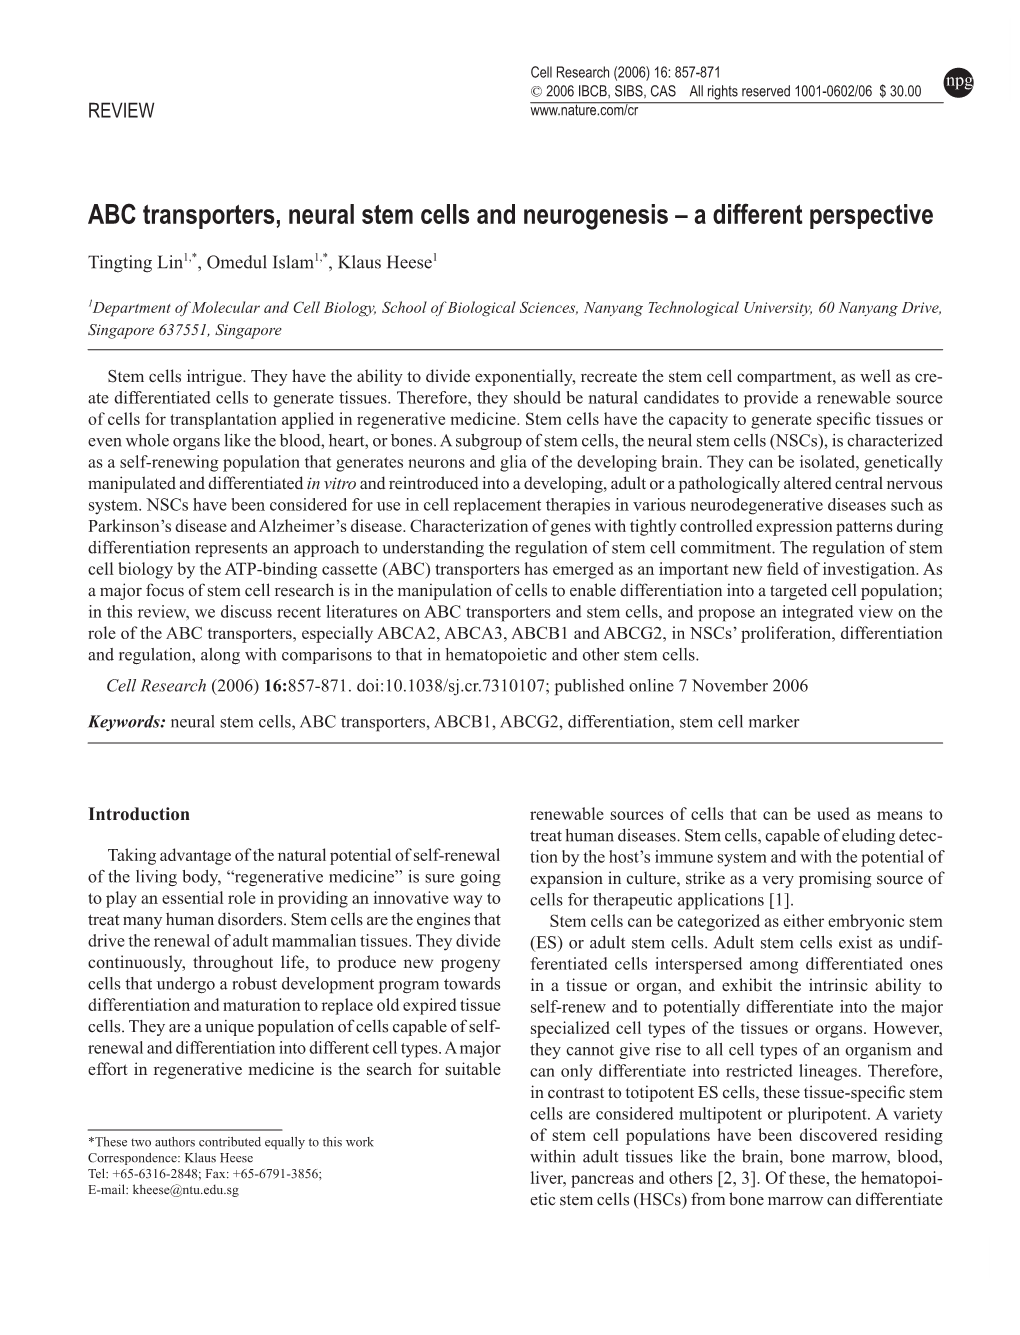 ABC Transporters, Neural Stem Cells and Neurogenesis – a Different Perspective